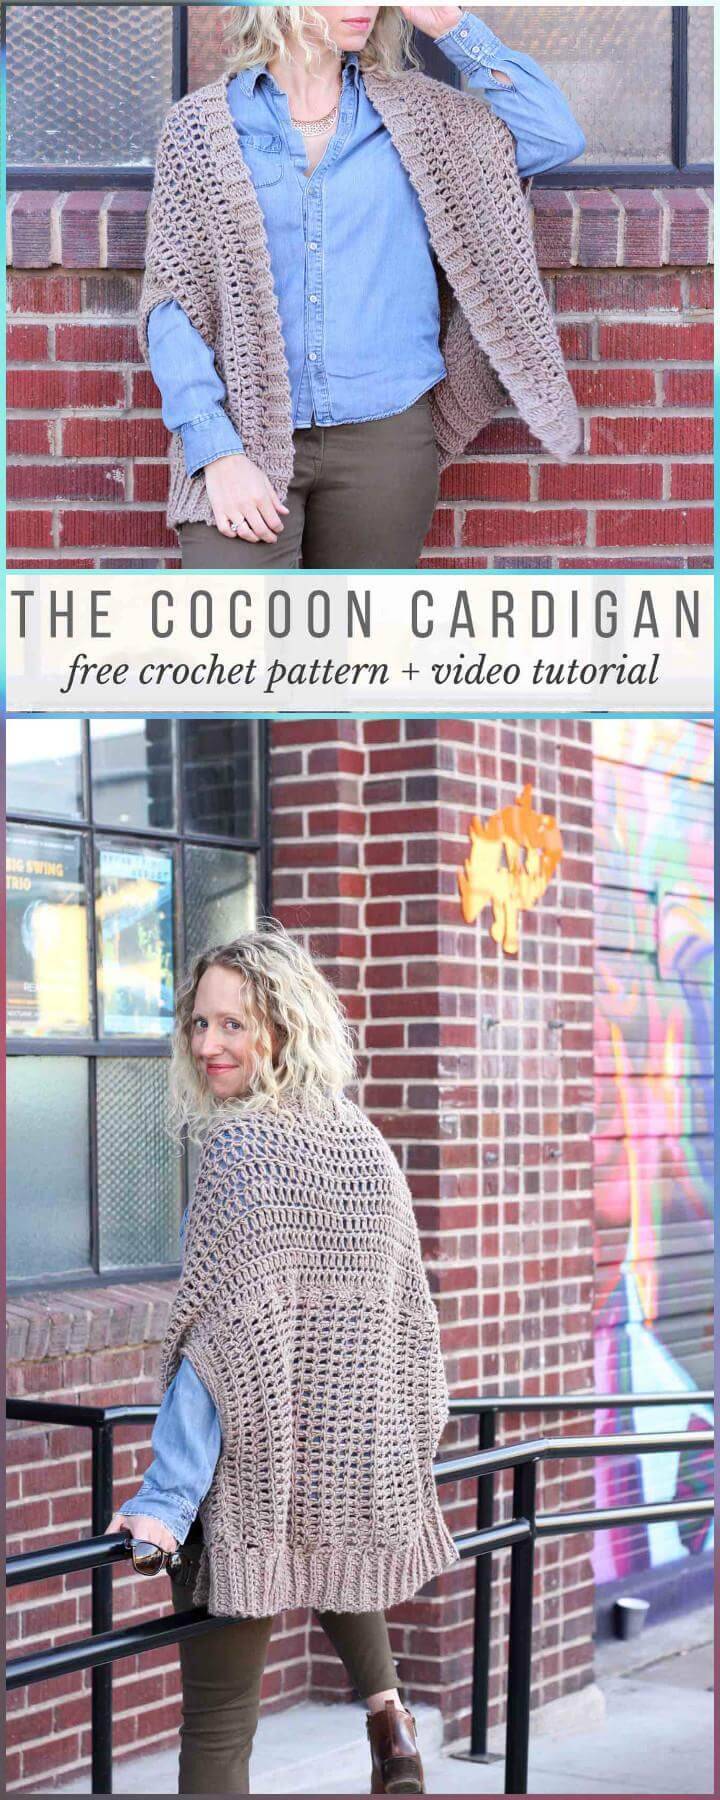 Crochet Cocoon Cardigan with Free Pattern and Video Tutorial